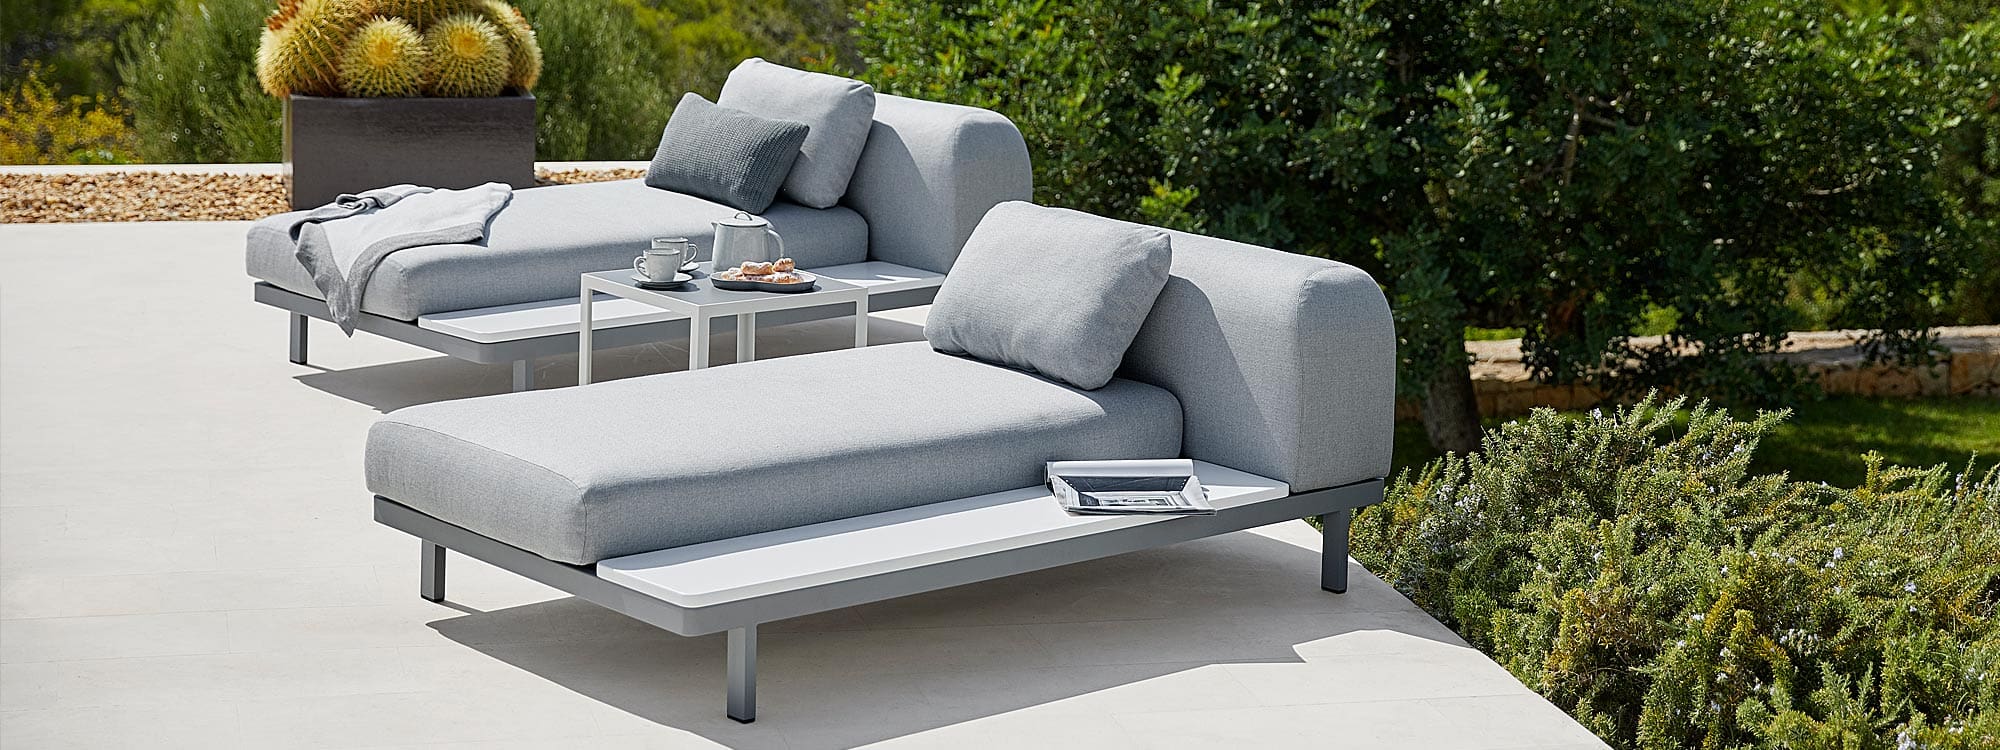 Image demonstrating how Cane-line Space garden sofa modules can be configured into daybeds